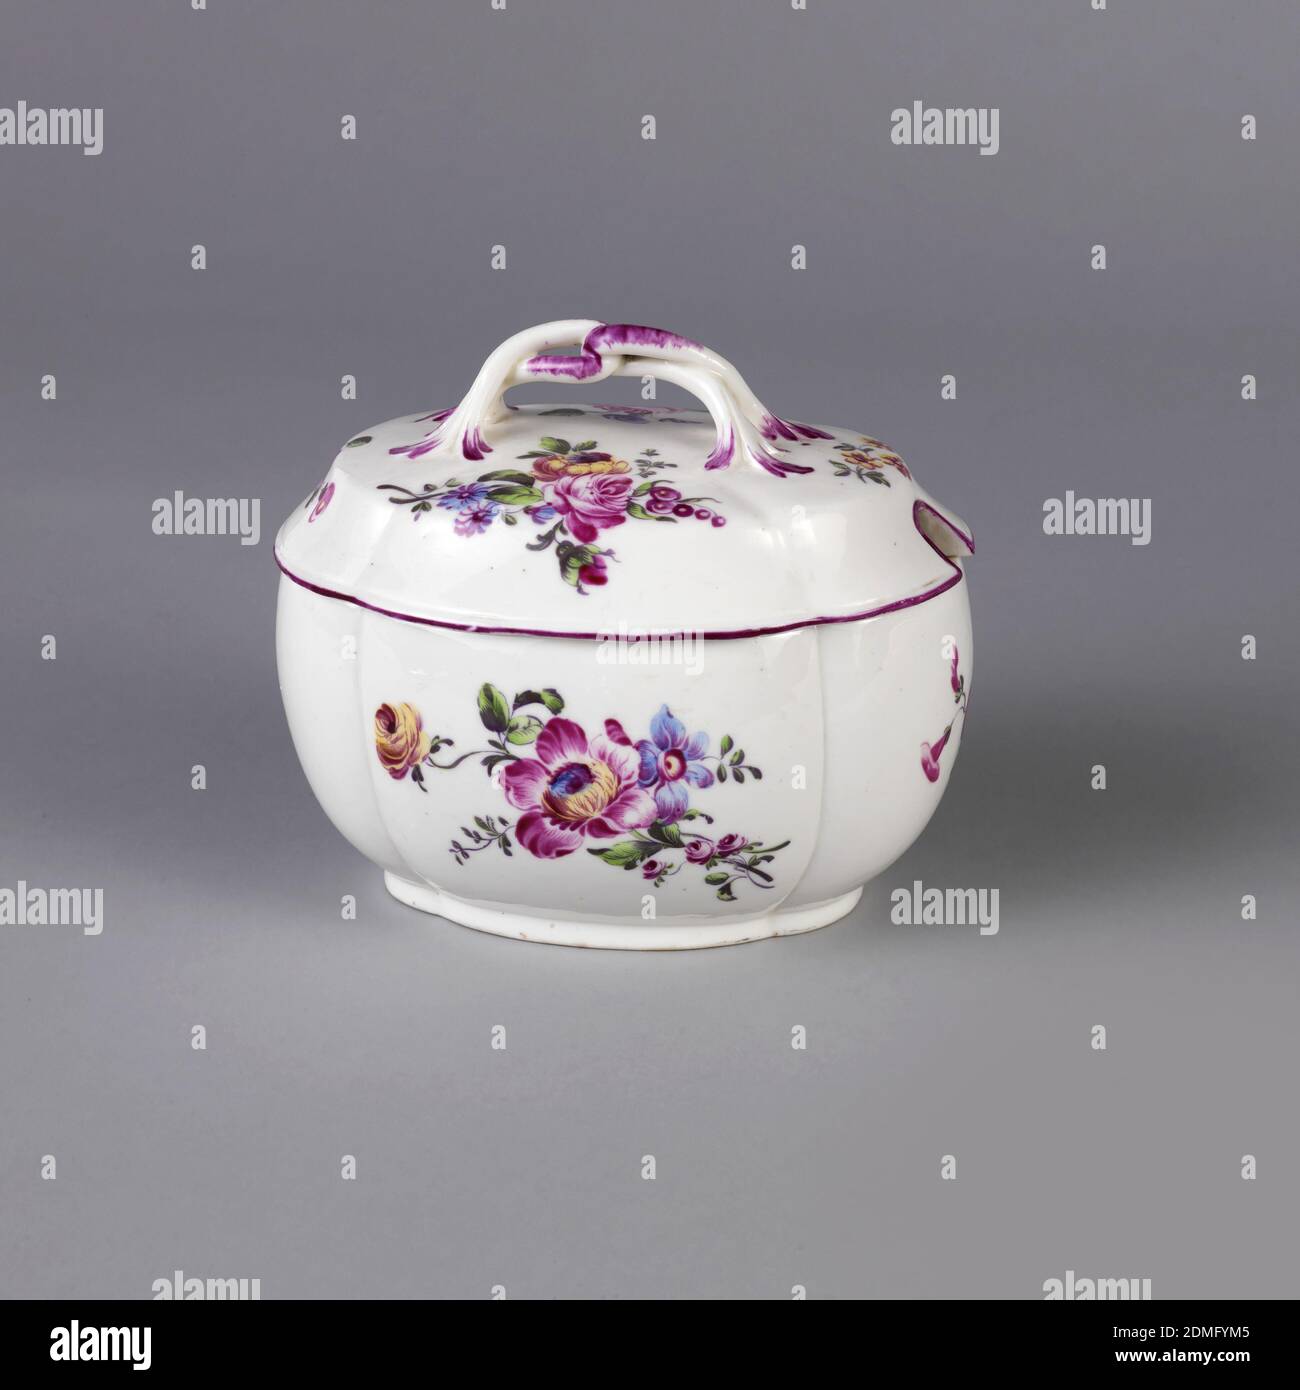 Sugar Bowl and Stand, Mennecy Porcelain Manufactory, French, active 1735 – 1773, soft paste porcelain, vitreous enamel, Round bowl with large scalloped edges; lid has plant form loop handle. Lid rim is painted in deep purple. Decorated with deep pink-purple, yellow and blue blossoms and green leaves and stems on white background. Bowl's interior has painted green leaf., Mennecy, France, mid- 18th century, ceramics, Decorative Arts, sugar bowl and stand, sugar bowl and stand Stock Photo